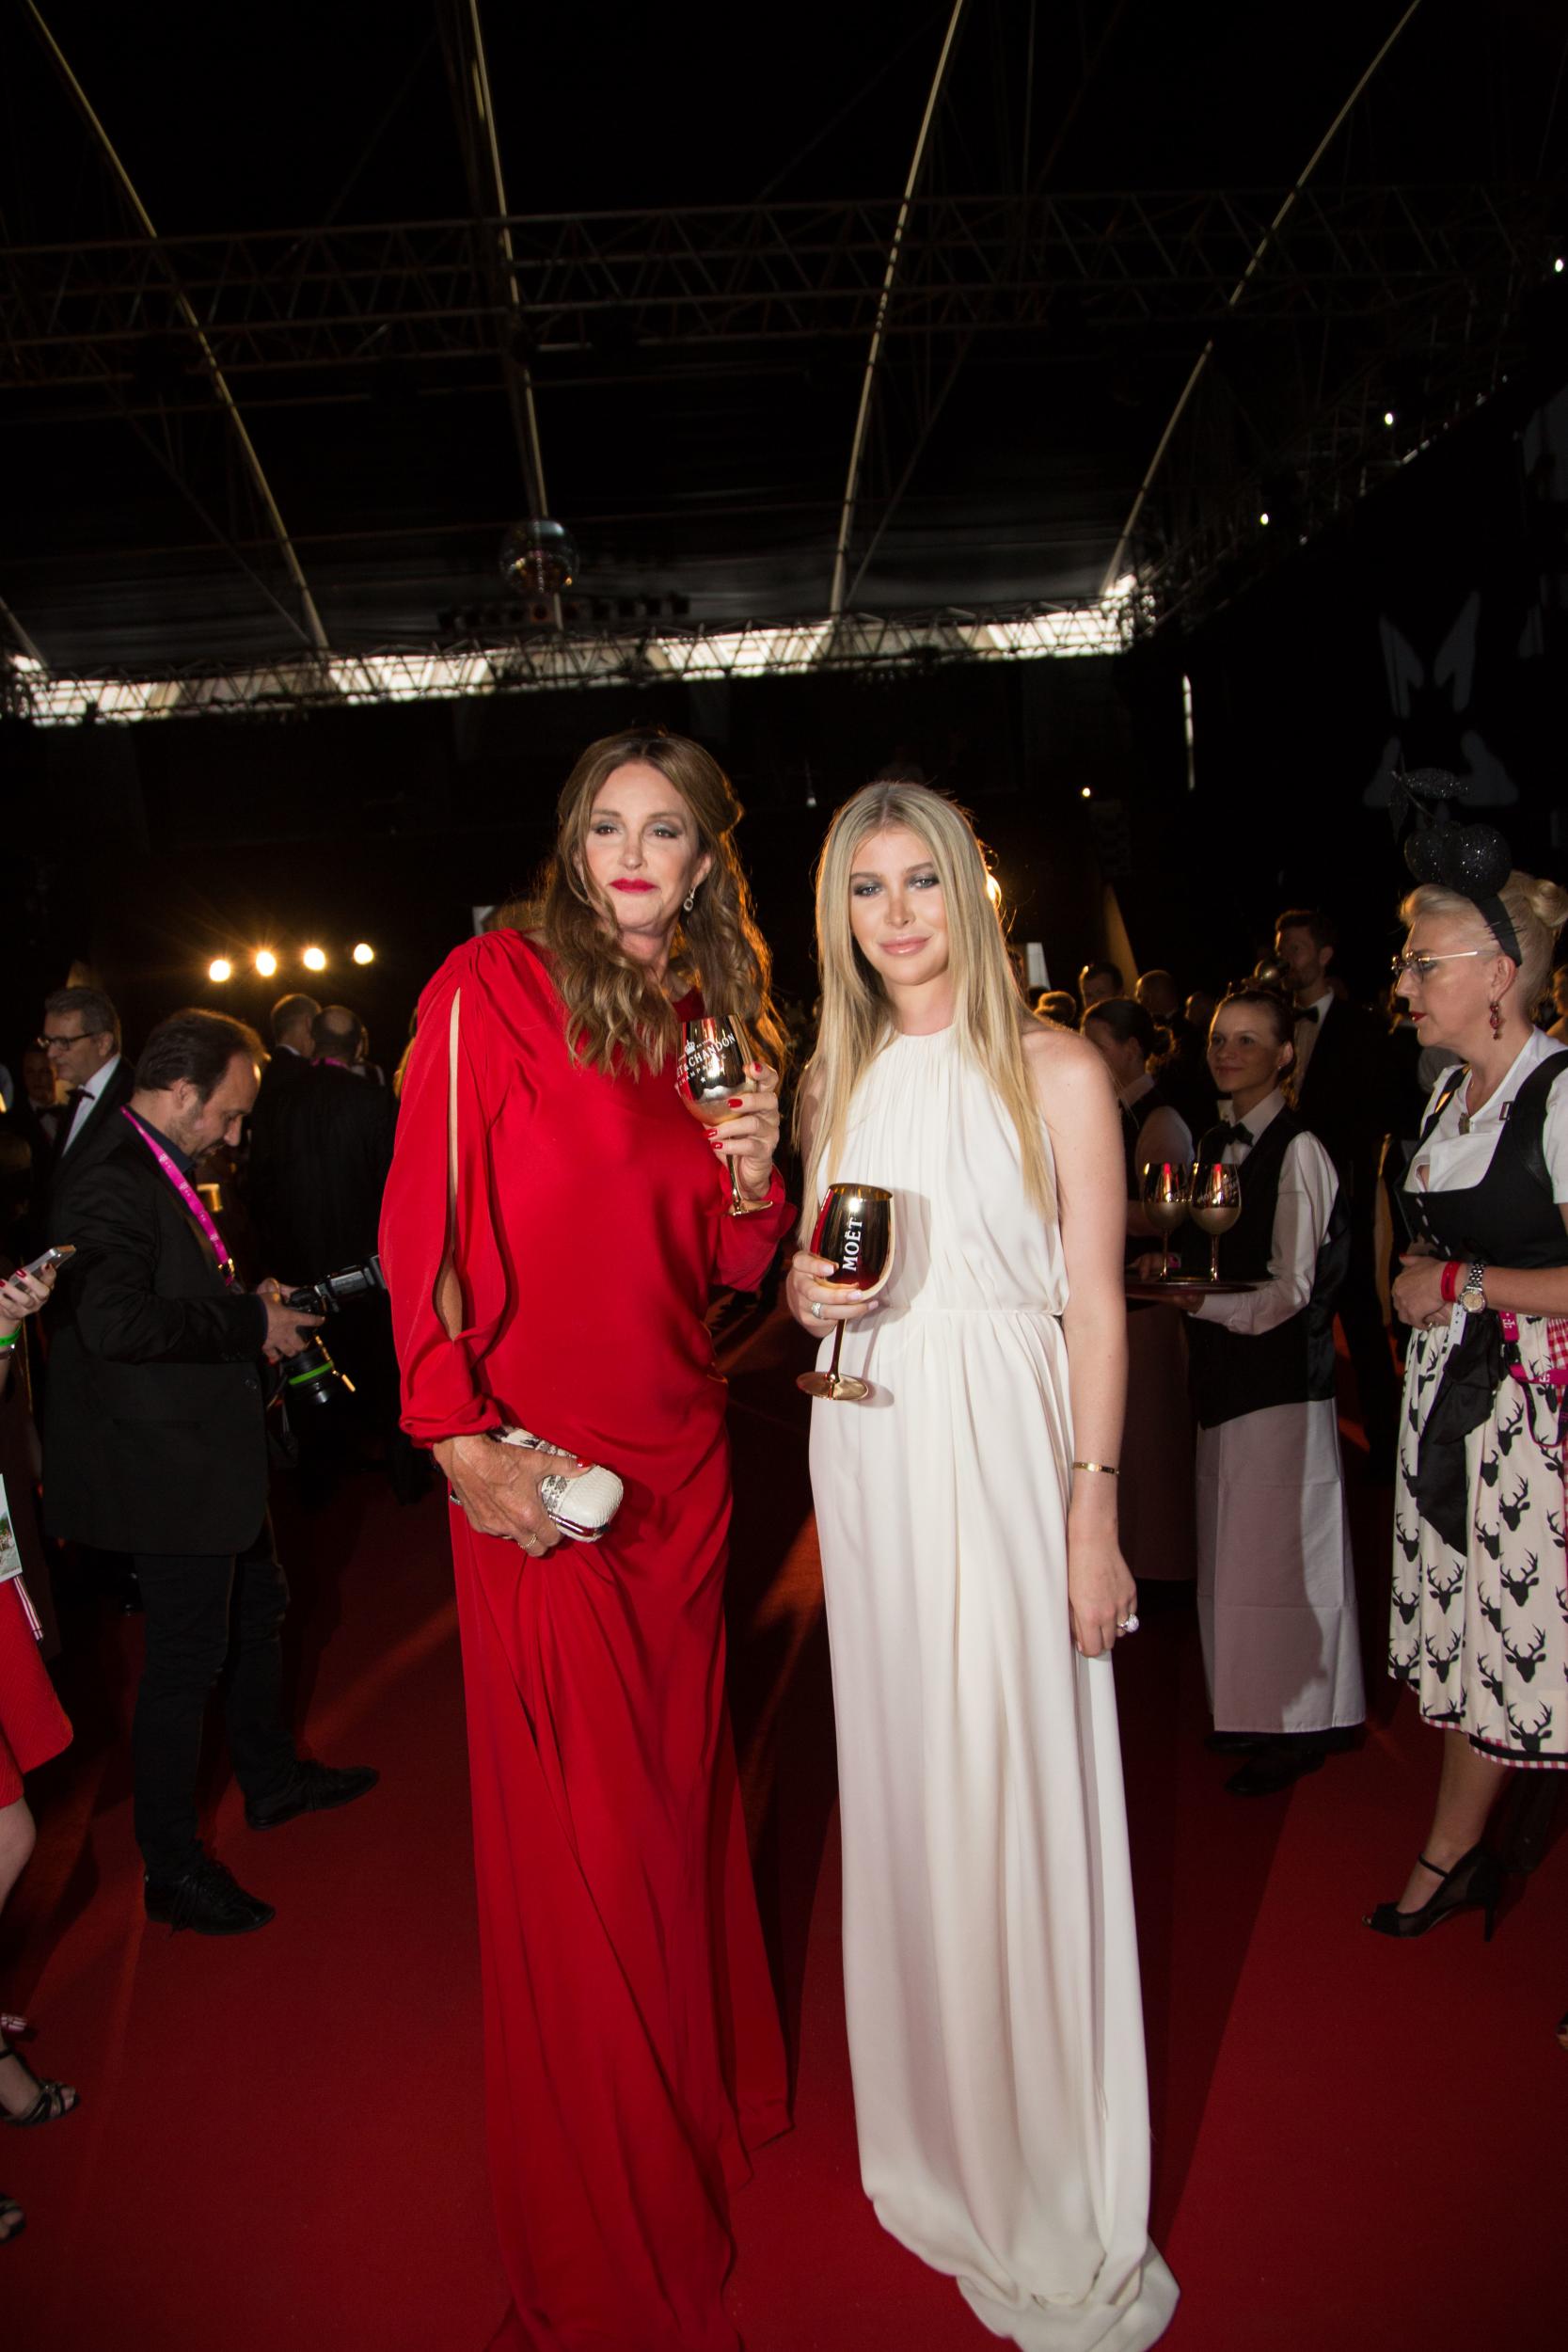 Caitlyn Jenner and Sophia Hutchins attend the Life Ball. Credit: Life Ball/ Juergen Hammerschmied